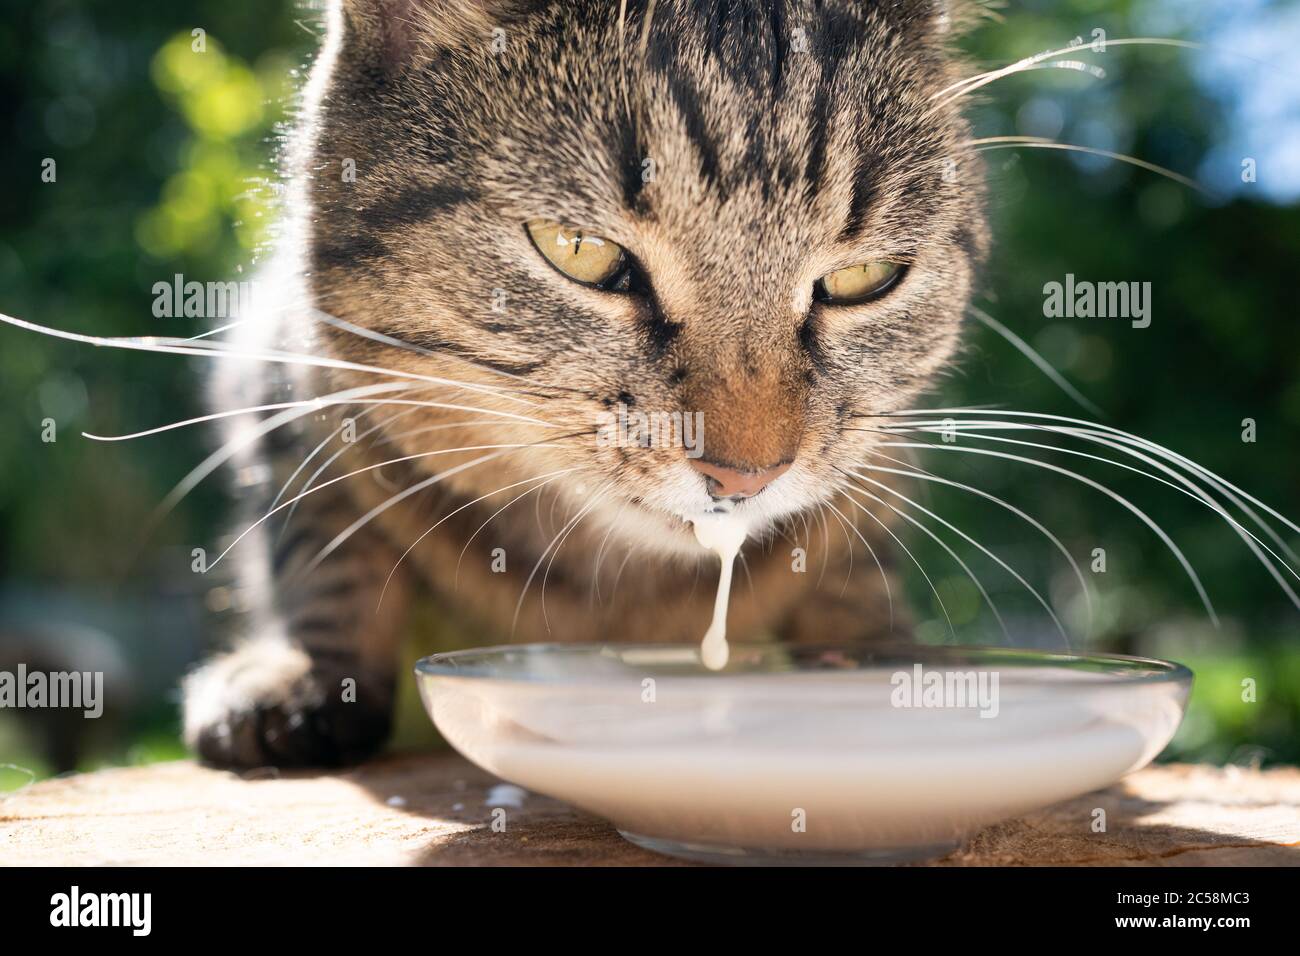 close up of a tabby cat drinking milk outdoors Stock Photo